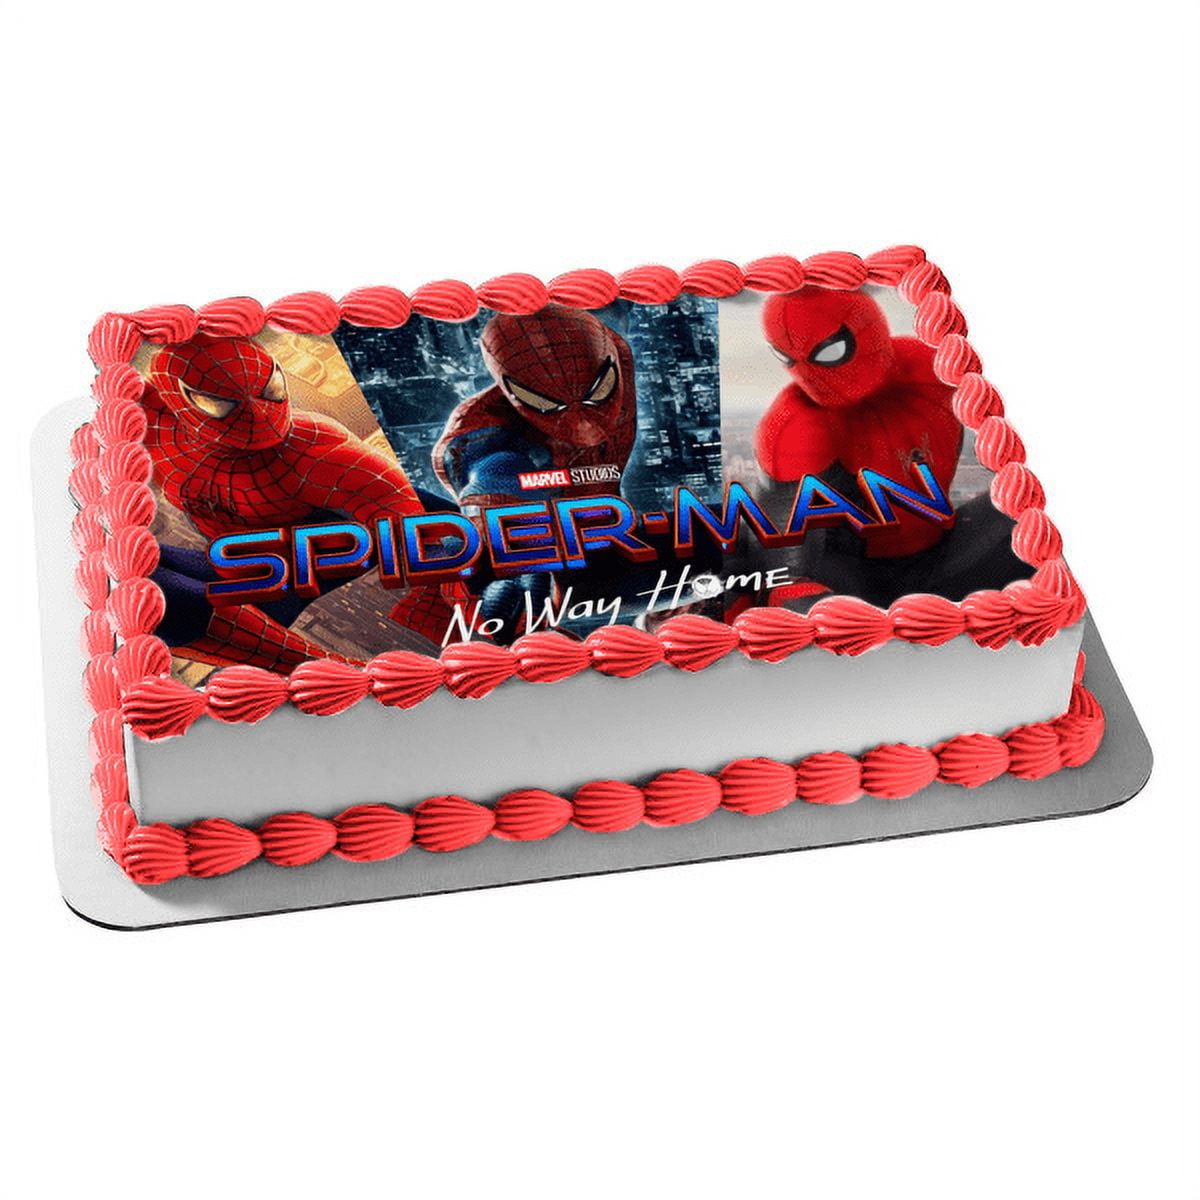 Spider-Man: No Way Home Edible Cake Topper Image ABPID54825 ...